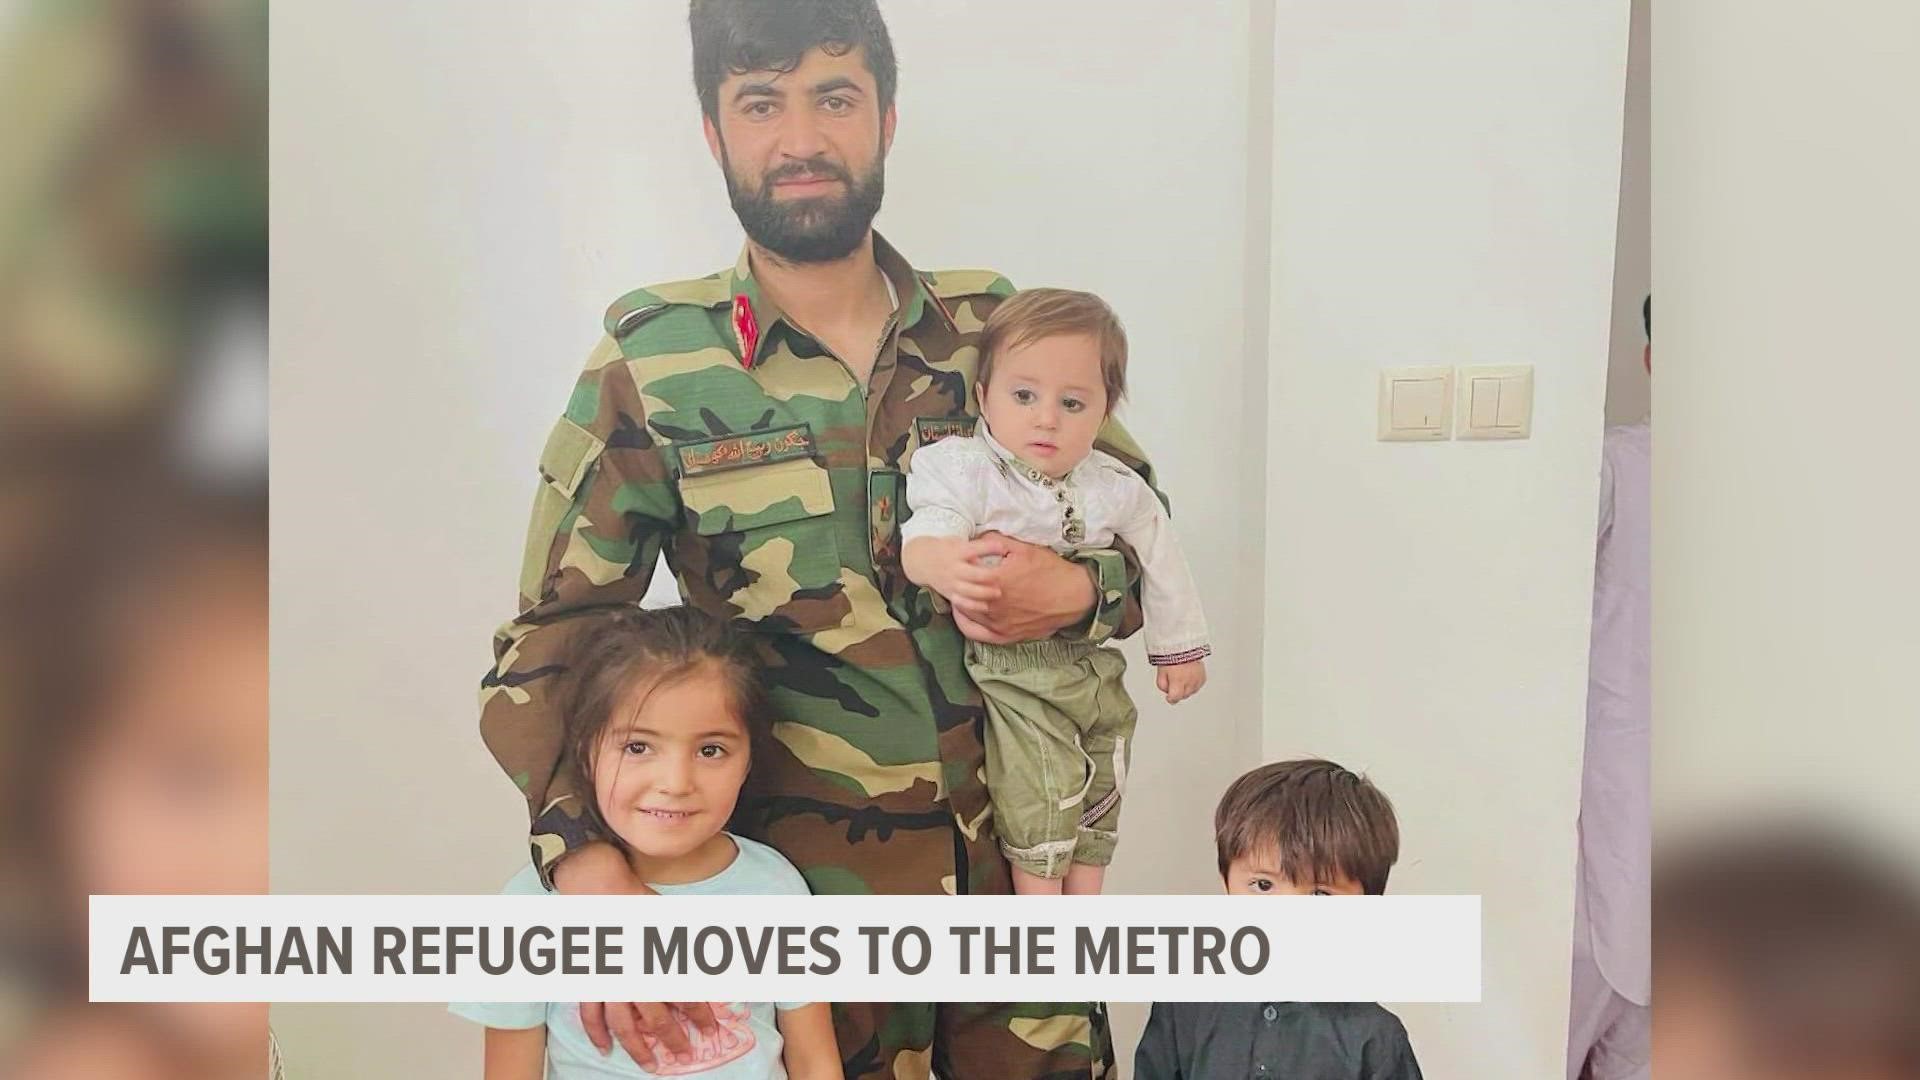 An Afghan refugee and his family are now living in the metro five months after being evacuated from Afghanistan.